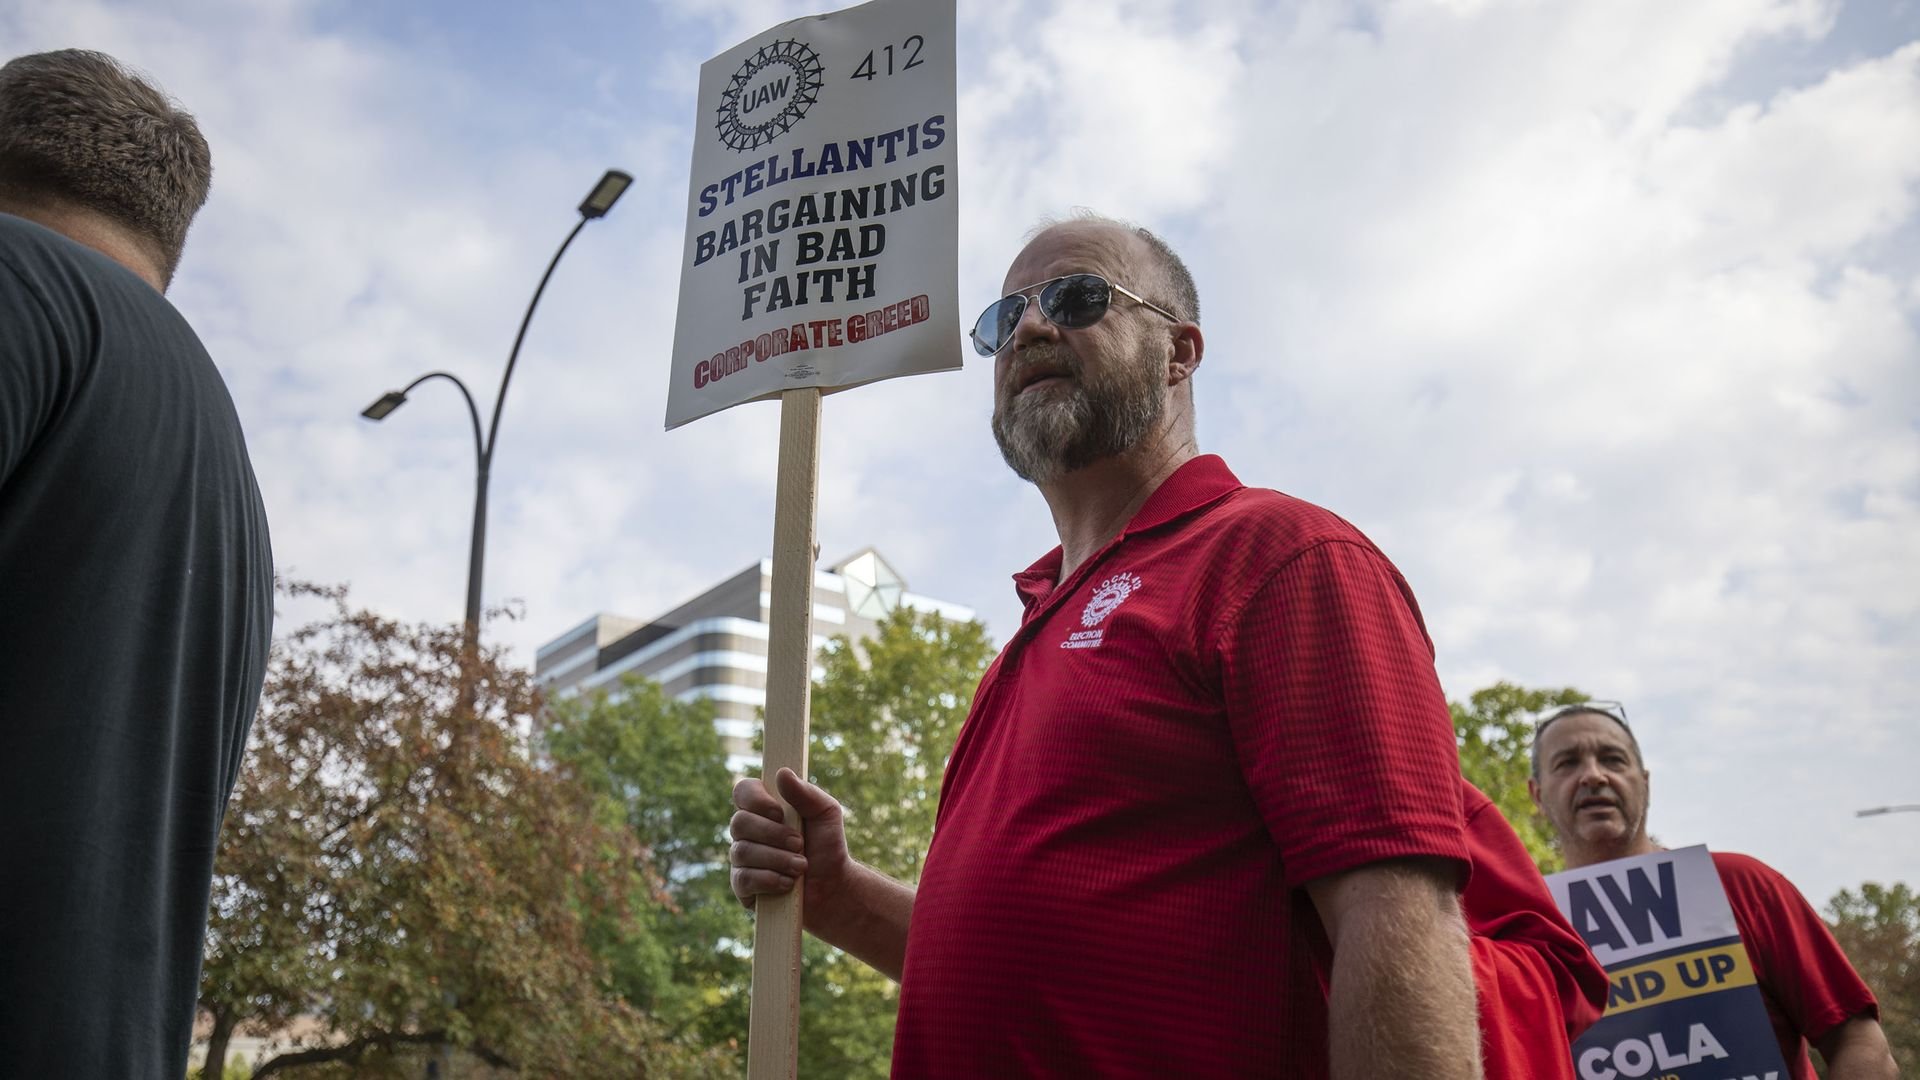 UAW to President Biden: "Join us on the picket line" as strike expands